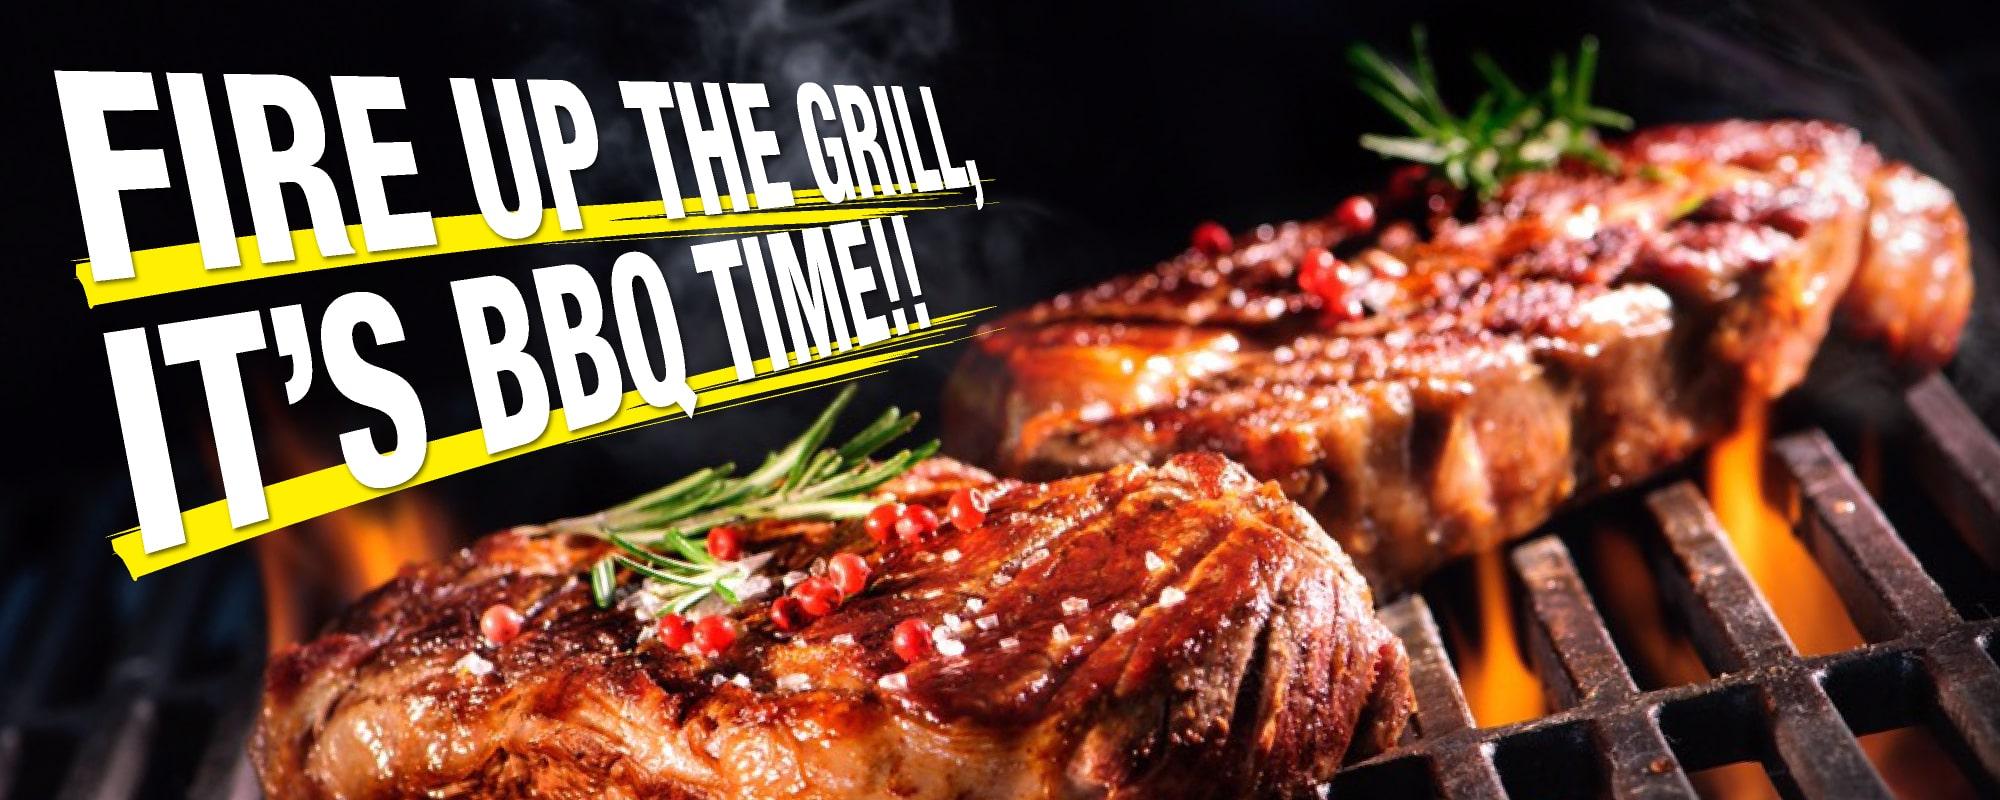 FIRE UP THE GRILL, IT'S BBQ TIME!